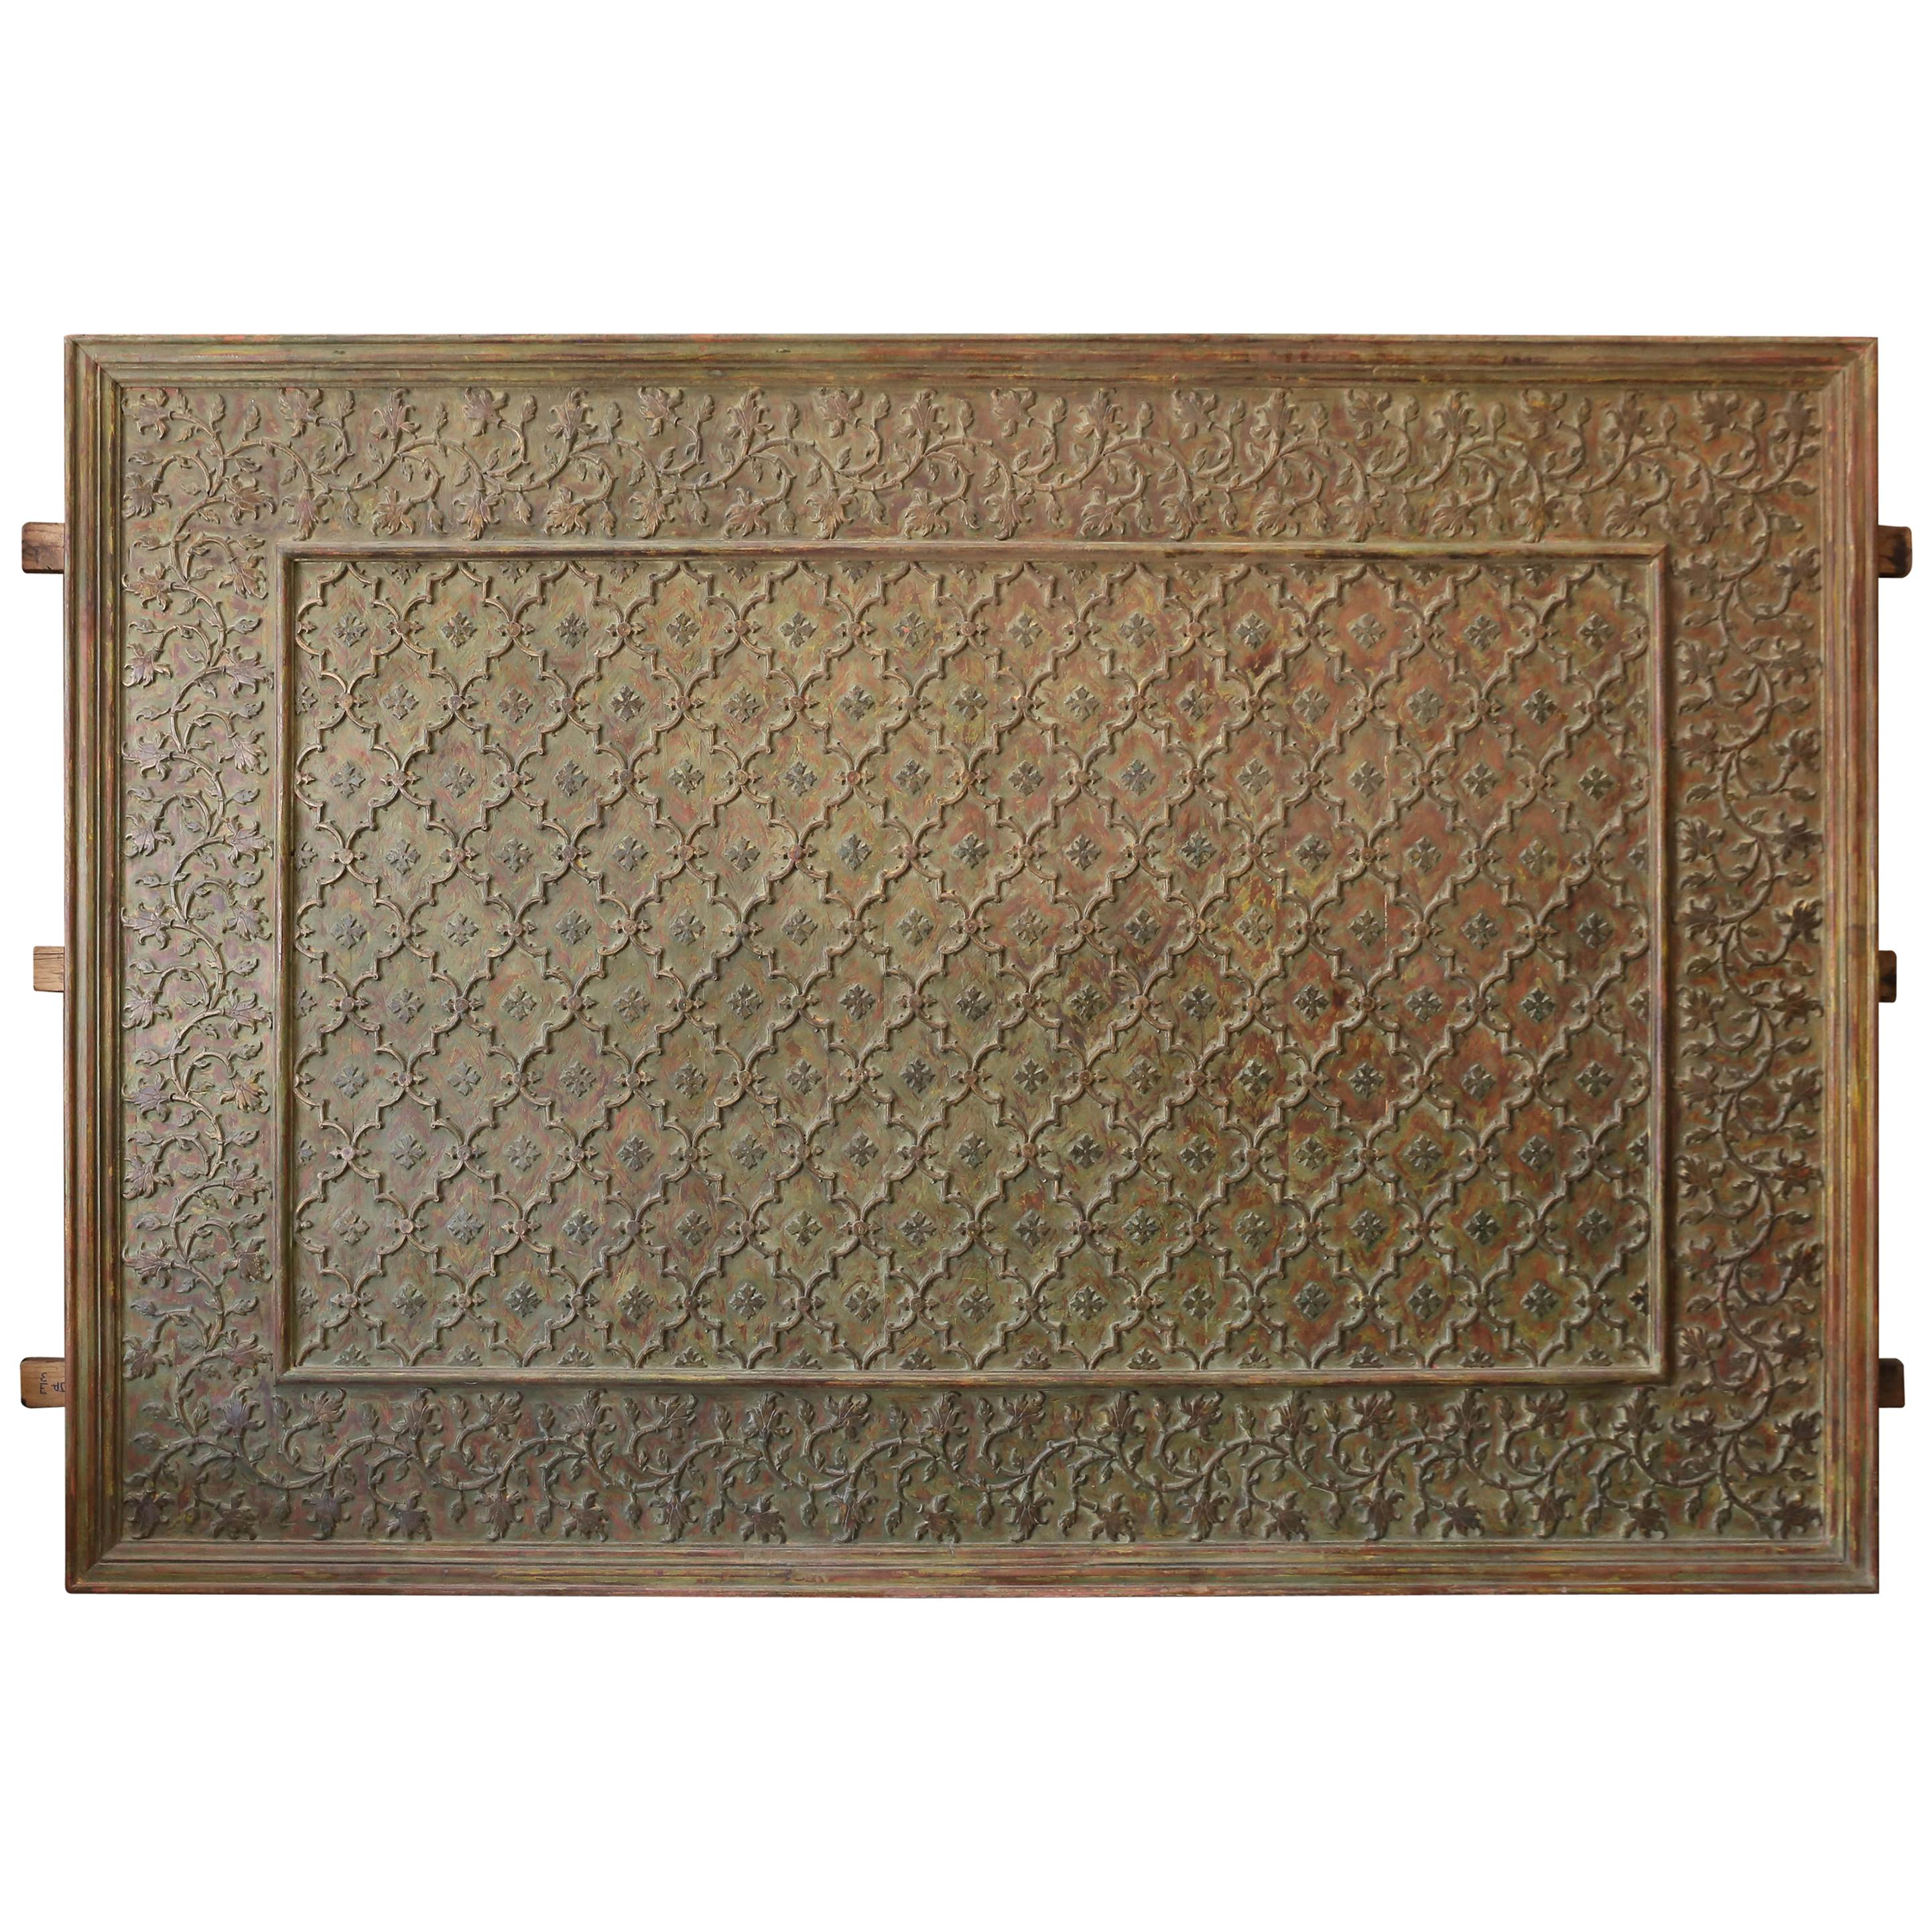 1840s Teak Wood and Bronze Ceiling Panel from a Jain Temple in Gujrat For Sale